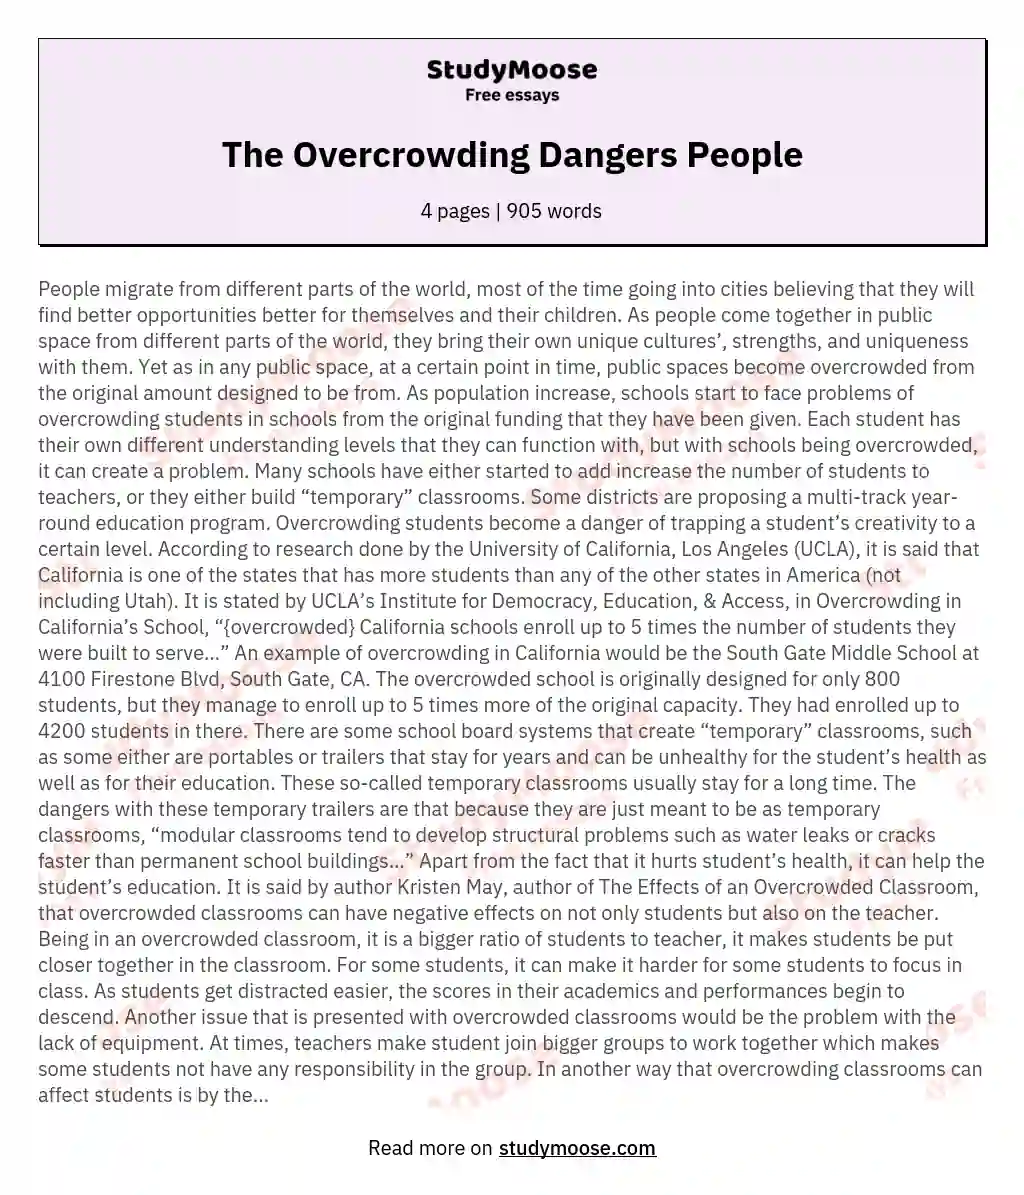 The Overcrowding Dangers People essay